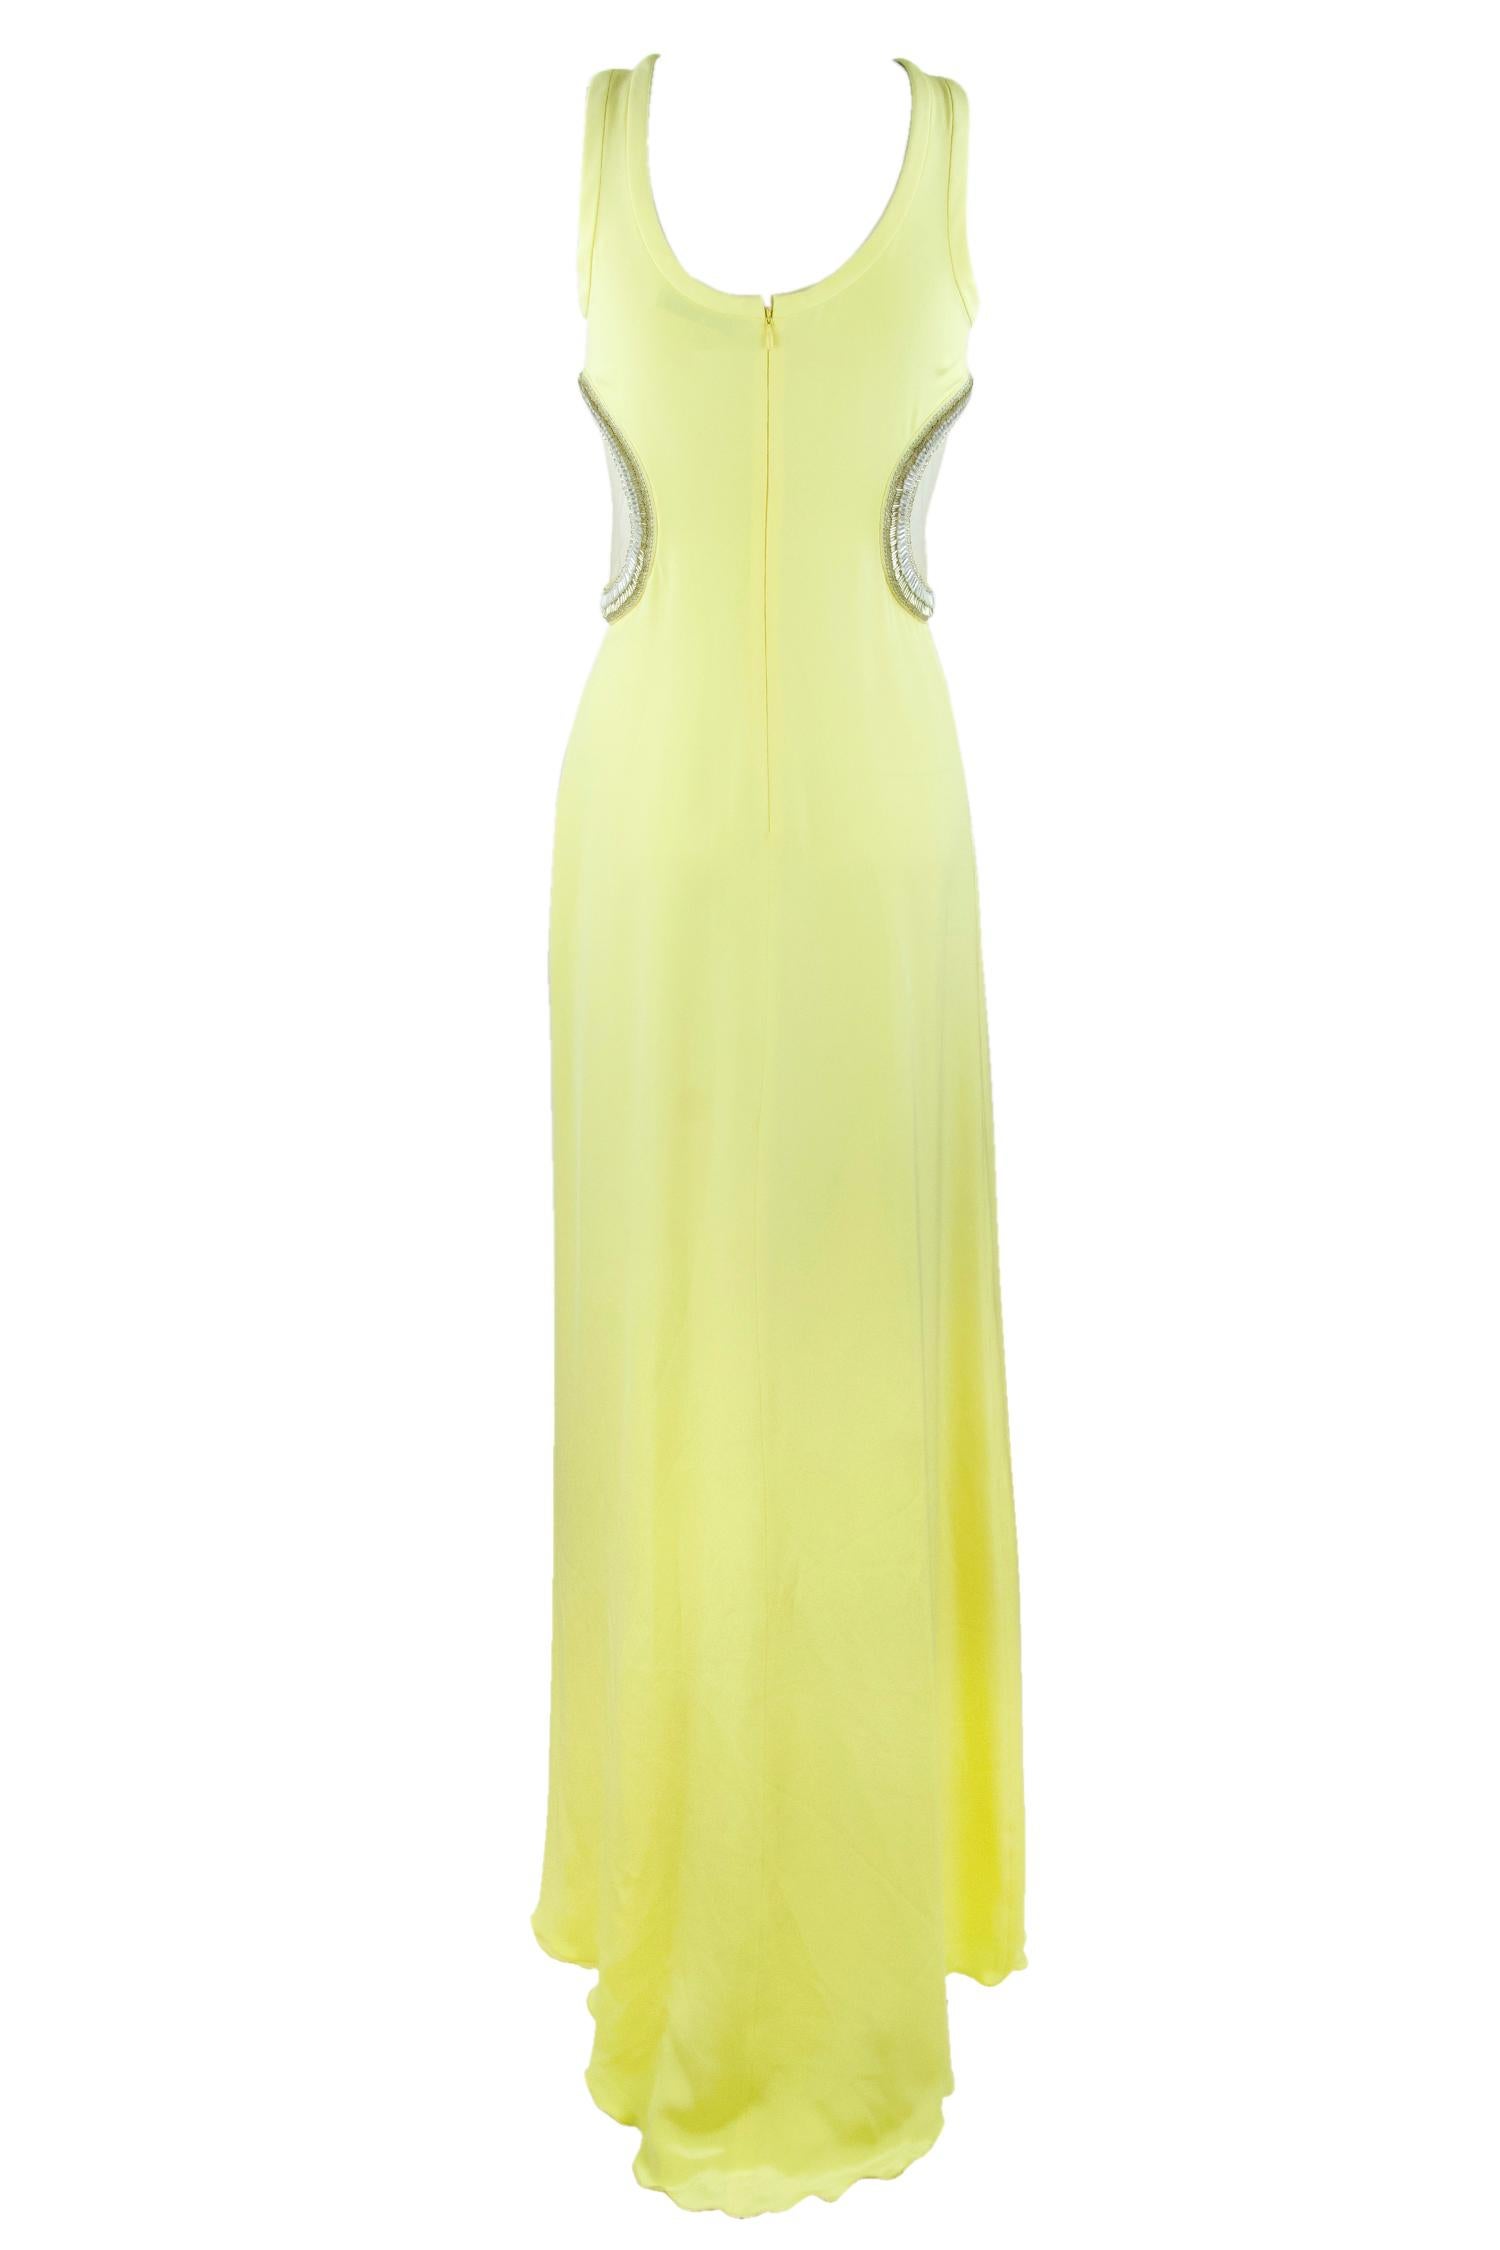 Pucci Yellow Silk Gown  In Excellent Condition For Sale In Newport, RI